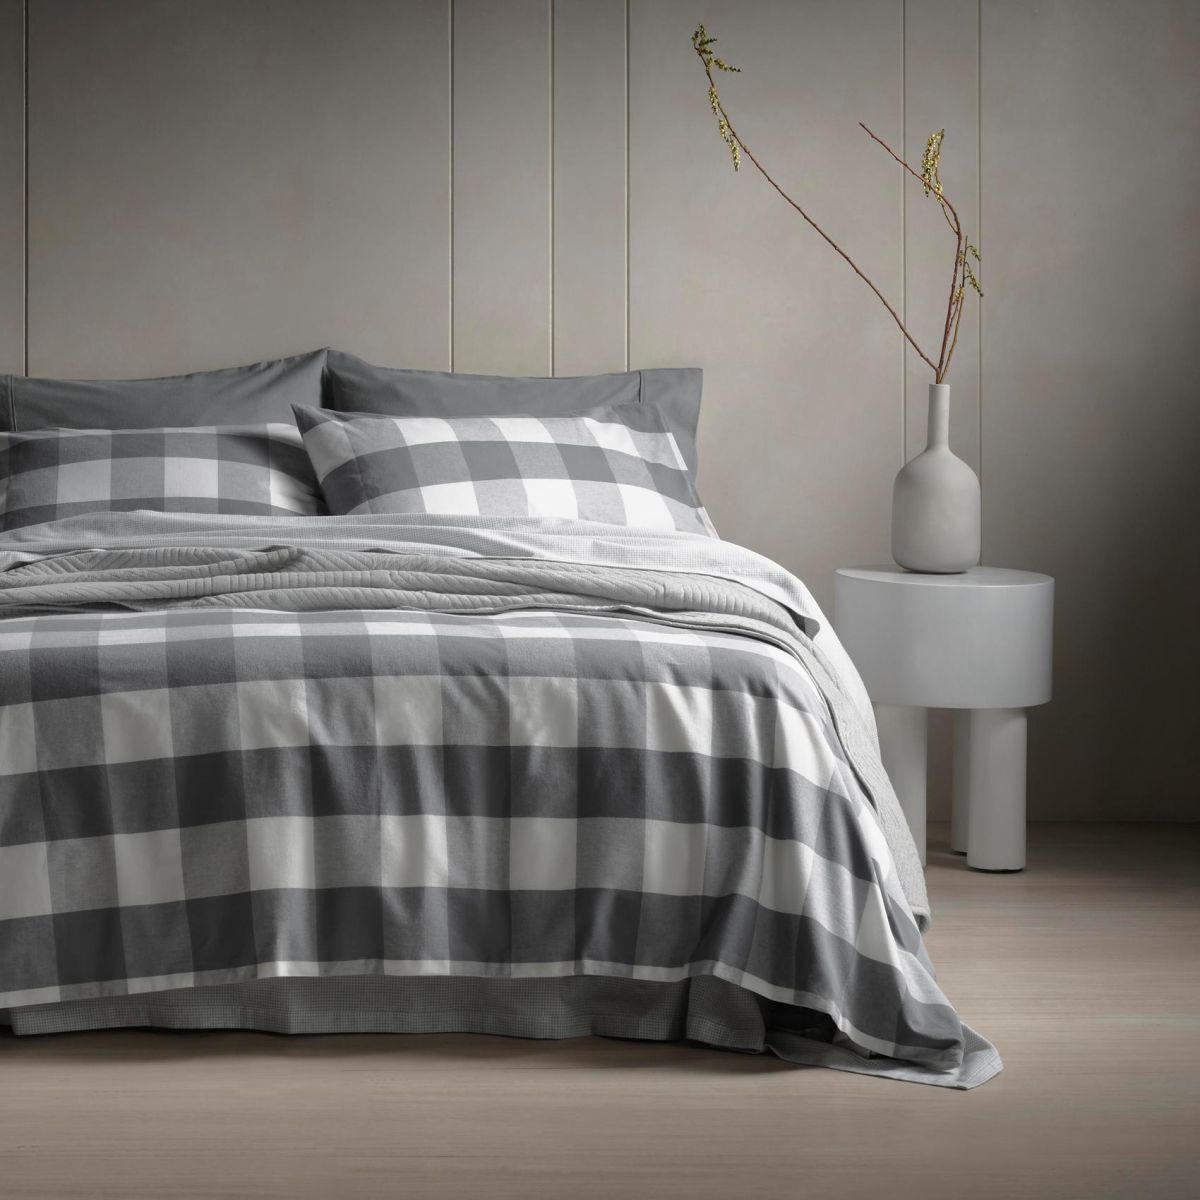 CONNOLLY CHARCOAL GREY,BRUSHED COTTON/FLANNELETTE QUILT COVER SET,BEDDING SET 